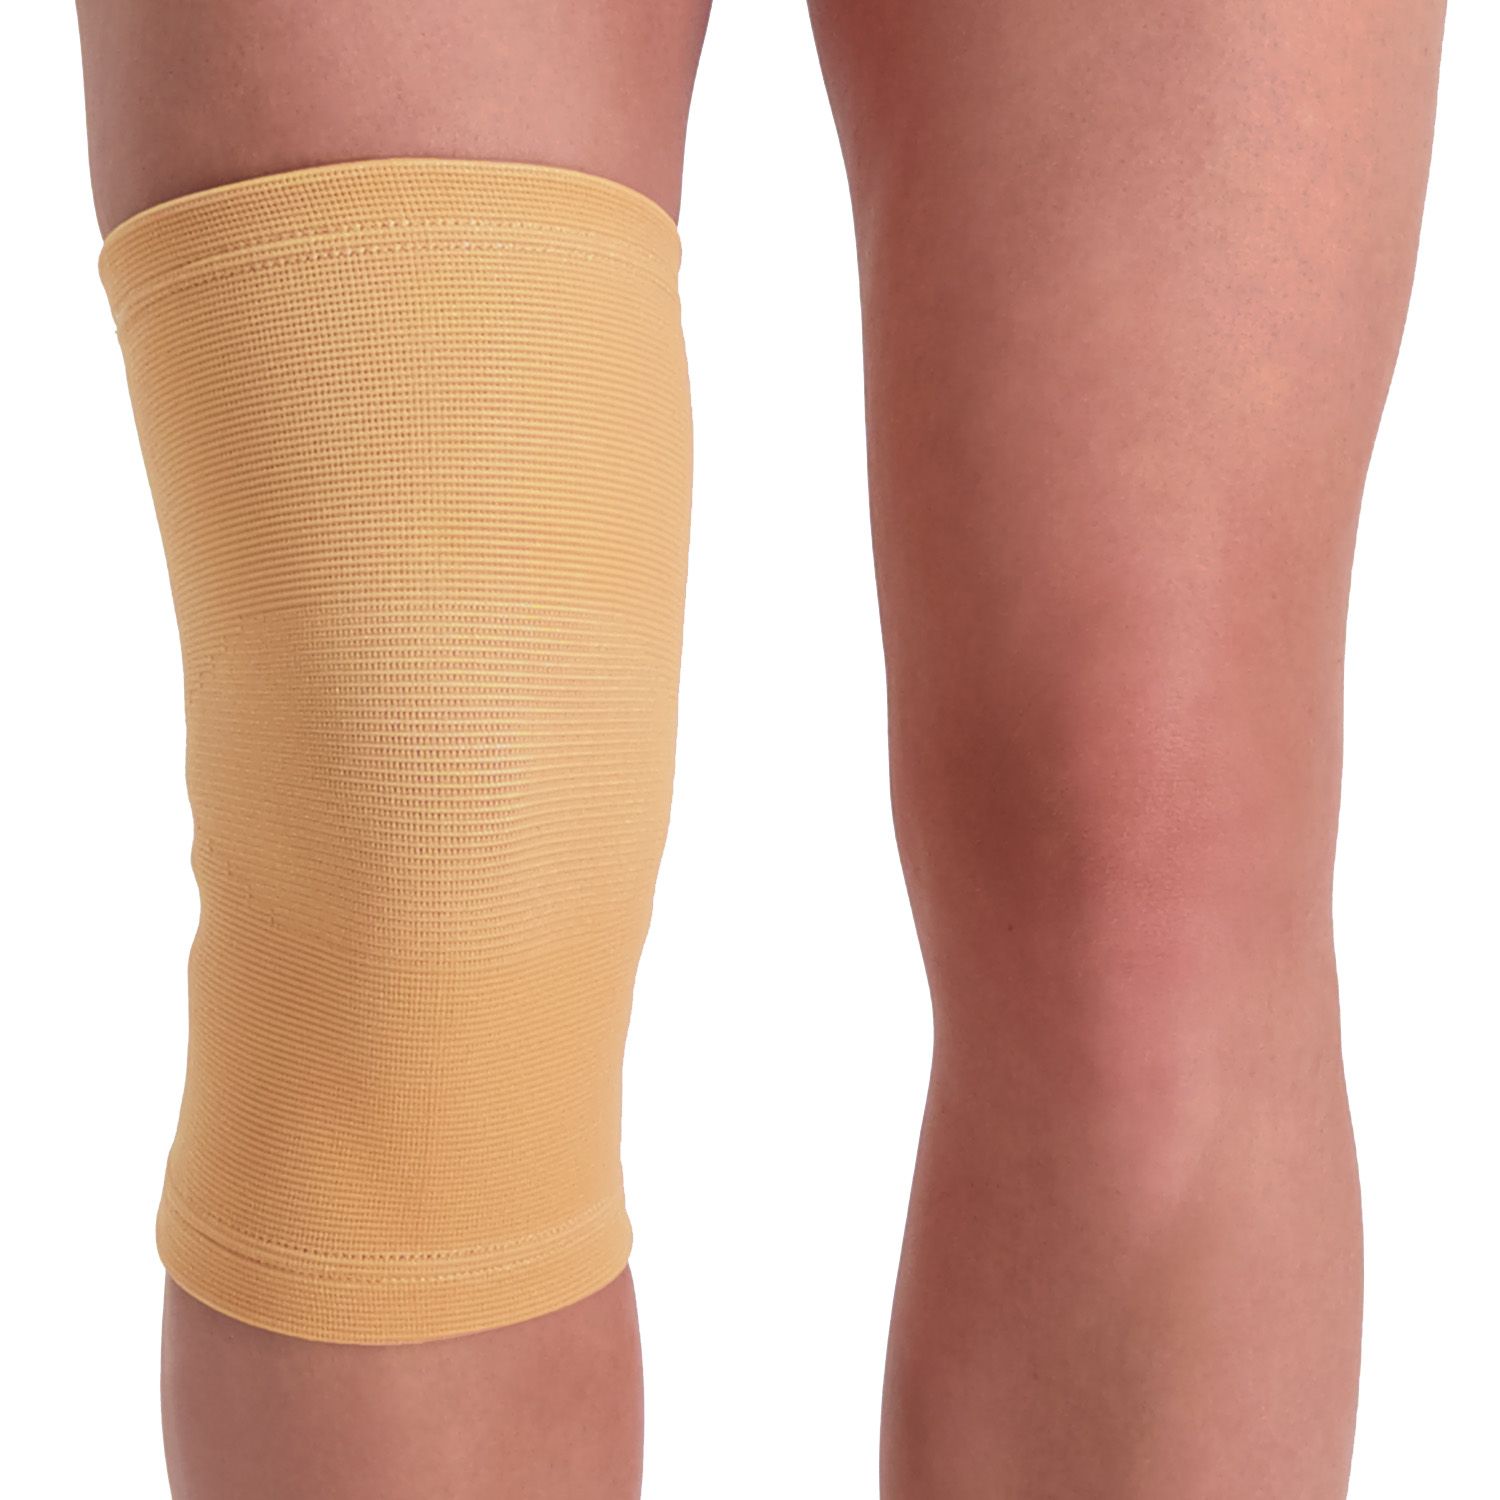 Dunimed knee sleeve front view